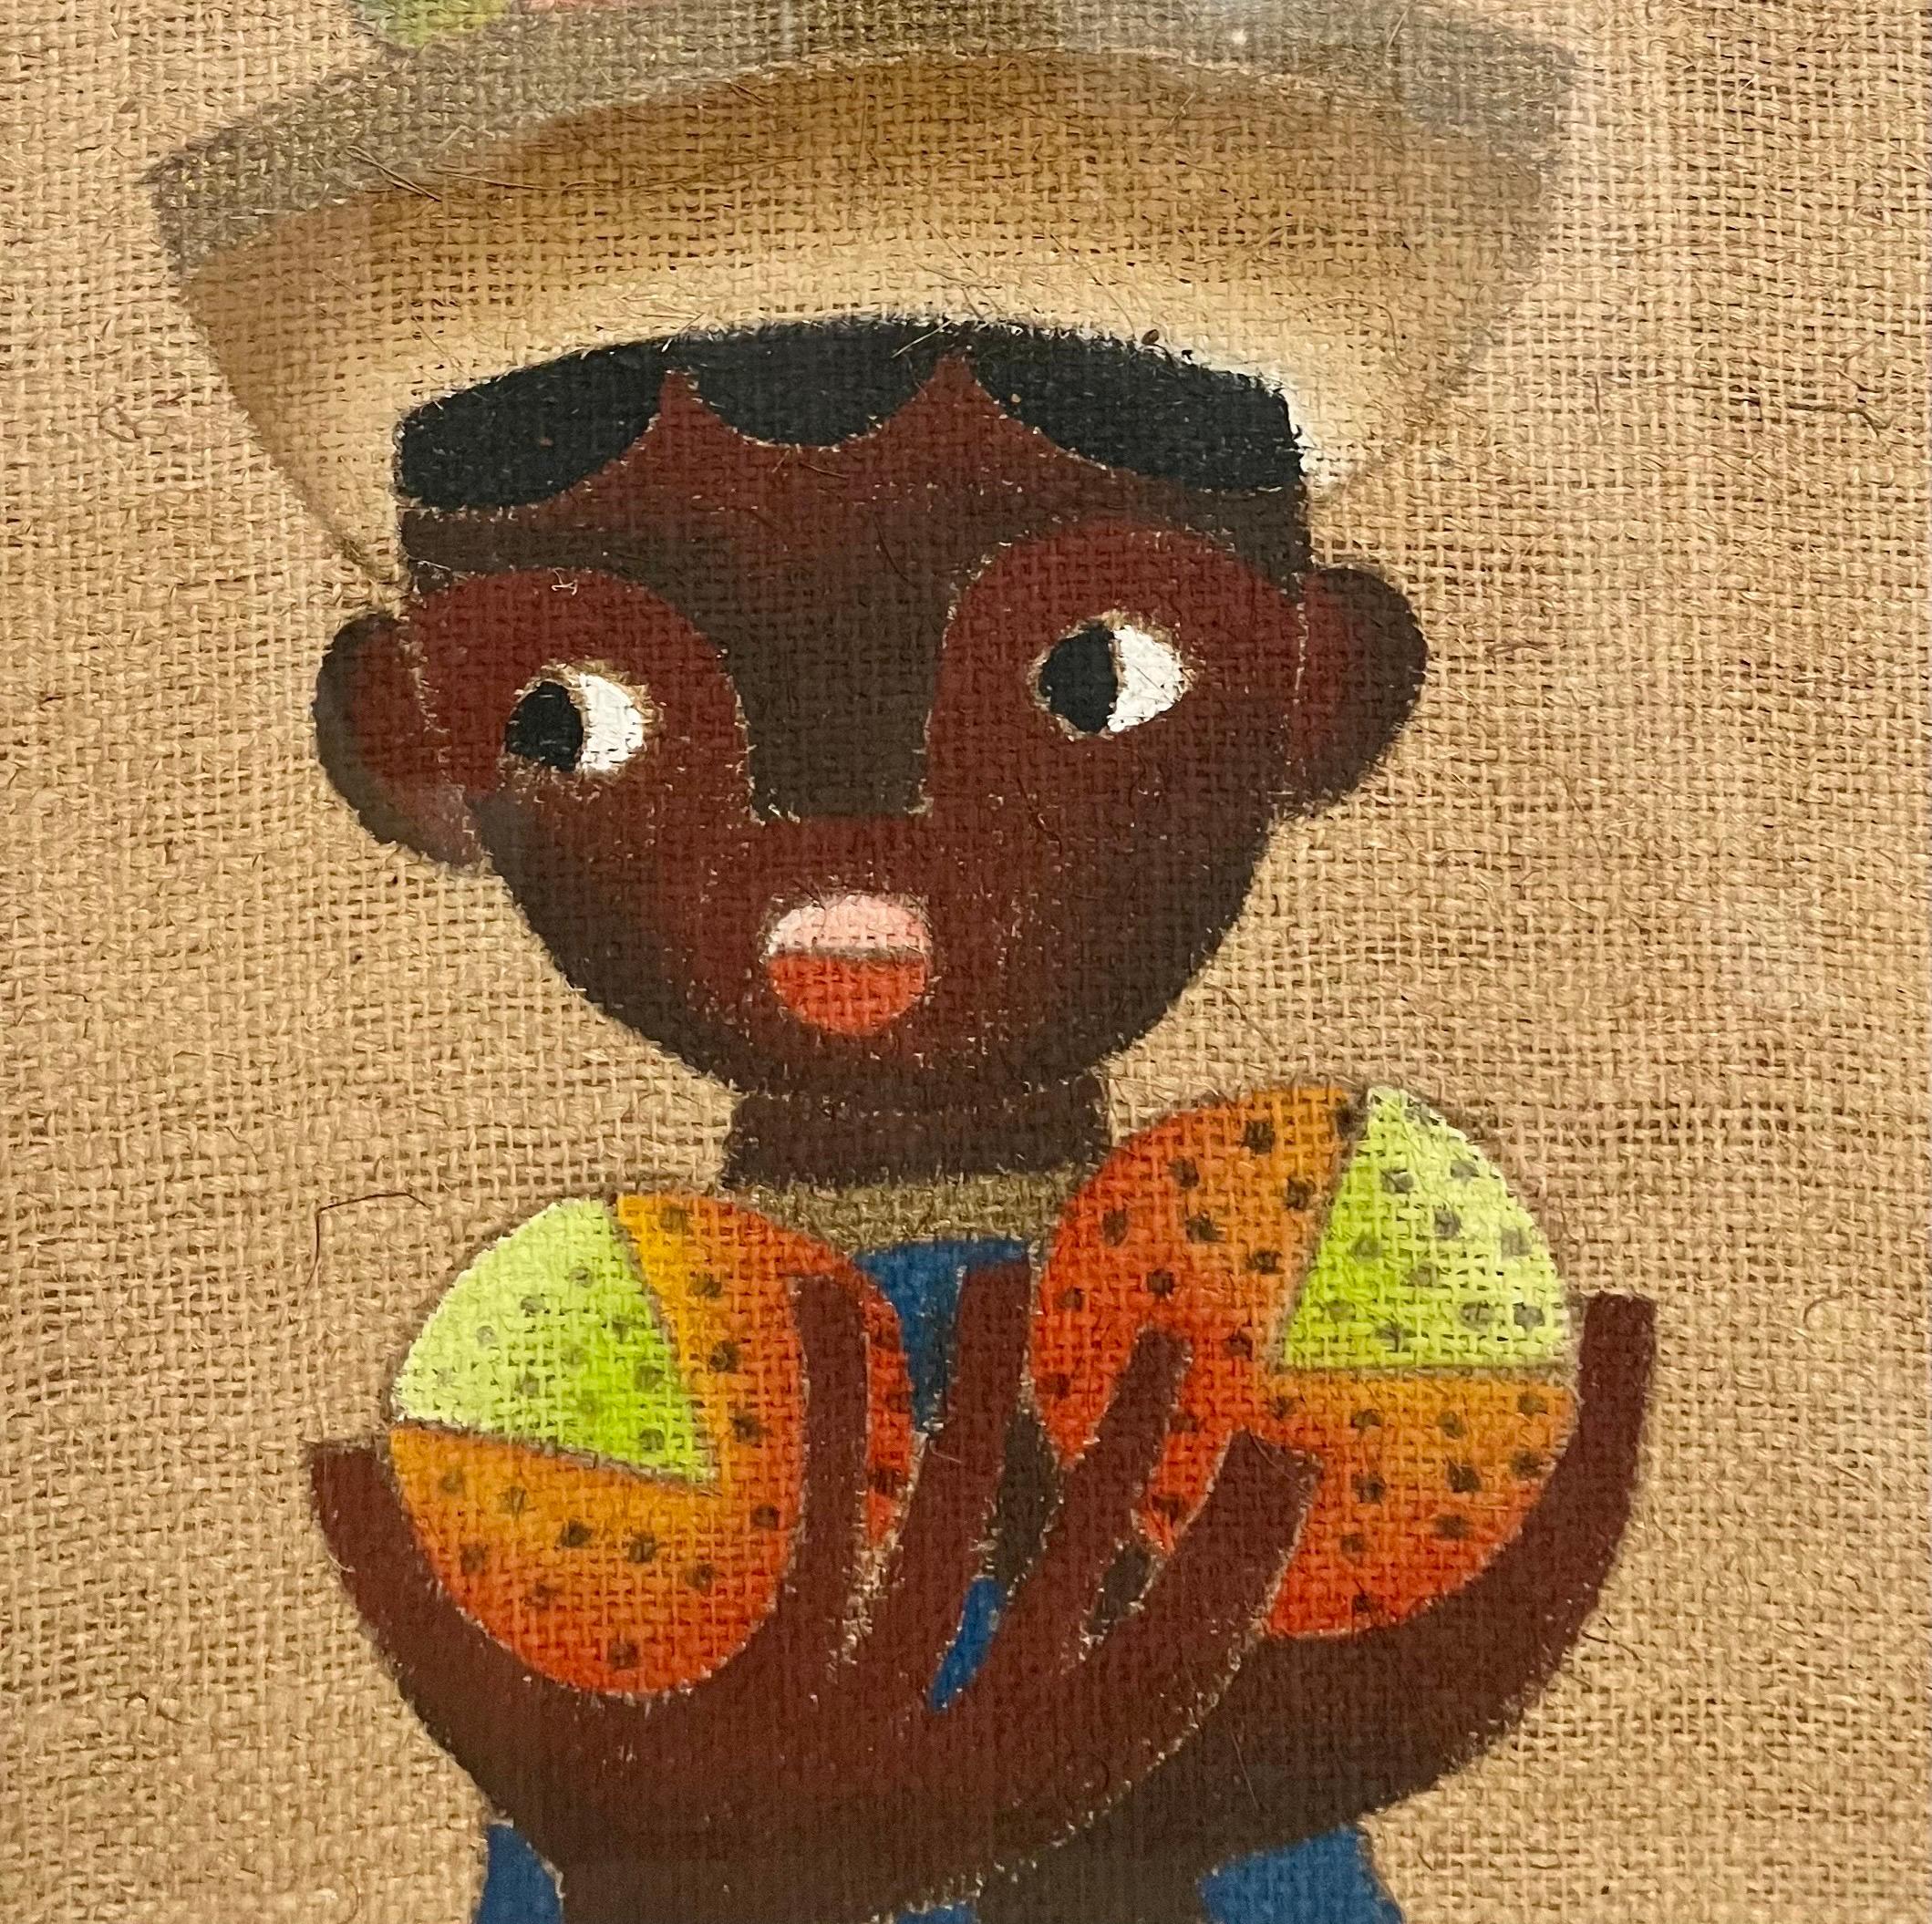 Jose Maria de Servin Figurative Painting - Folk Art Mexican Boy Oil Painting on Burlap Charming Naive African American Art